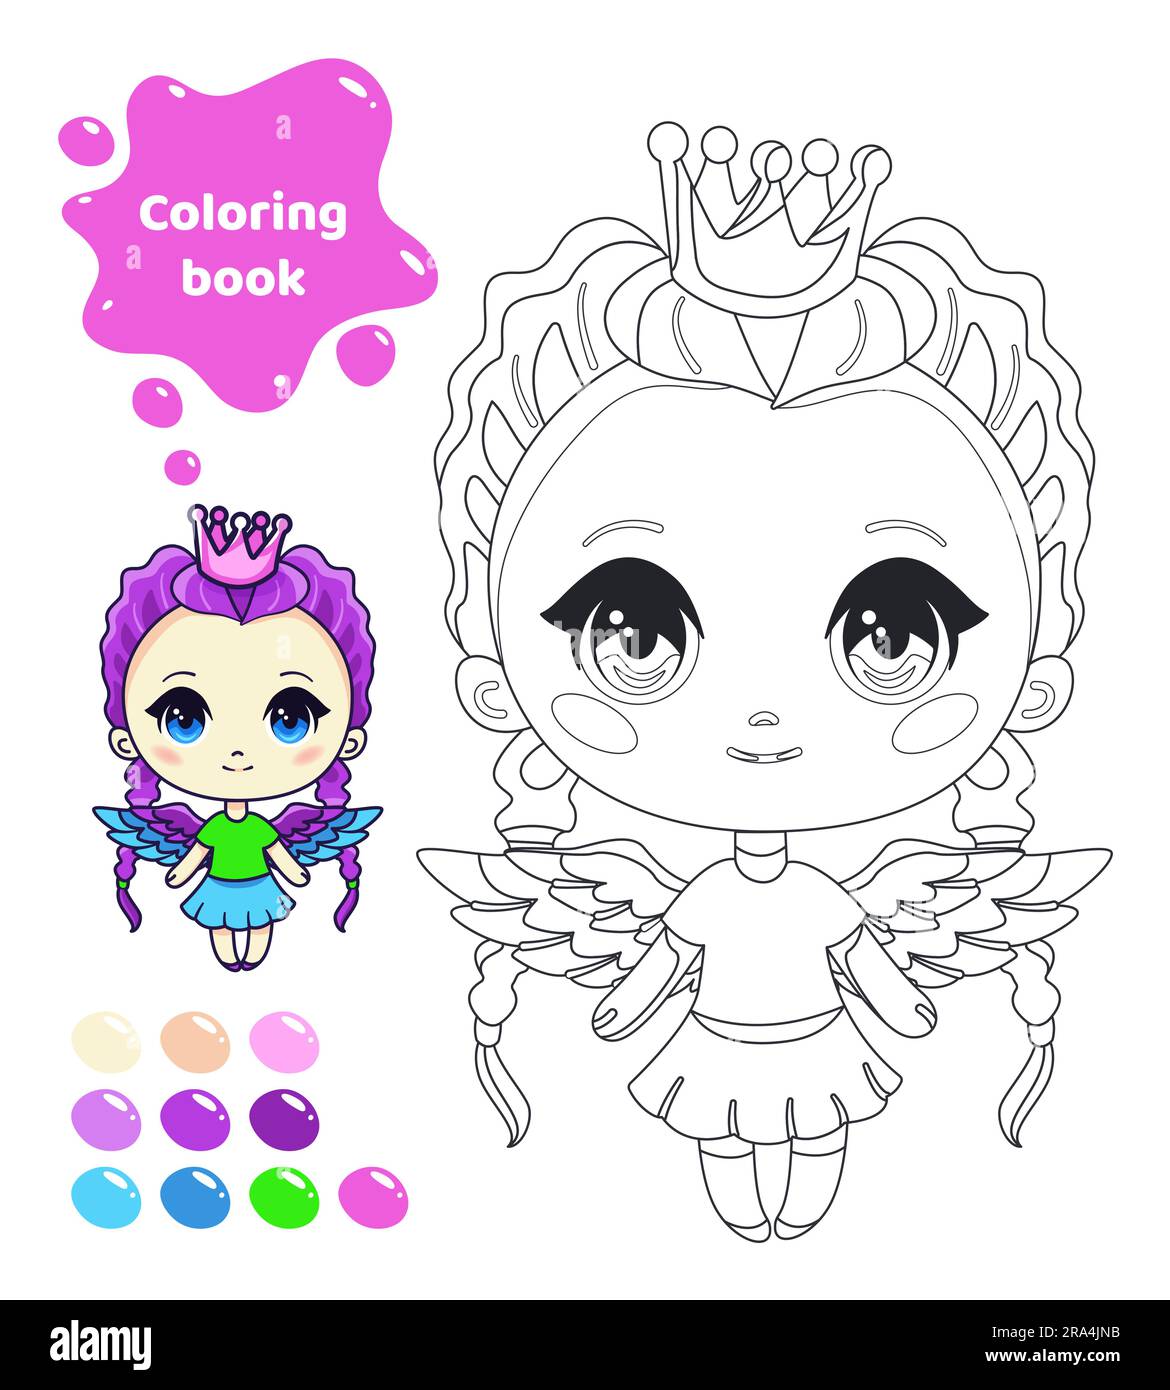 Coloring book for kids. Anime girl with wings. Stock Vector